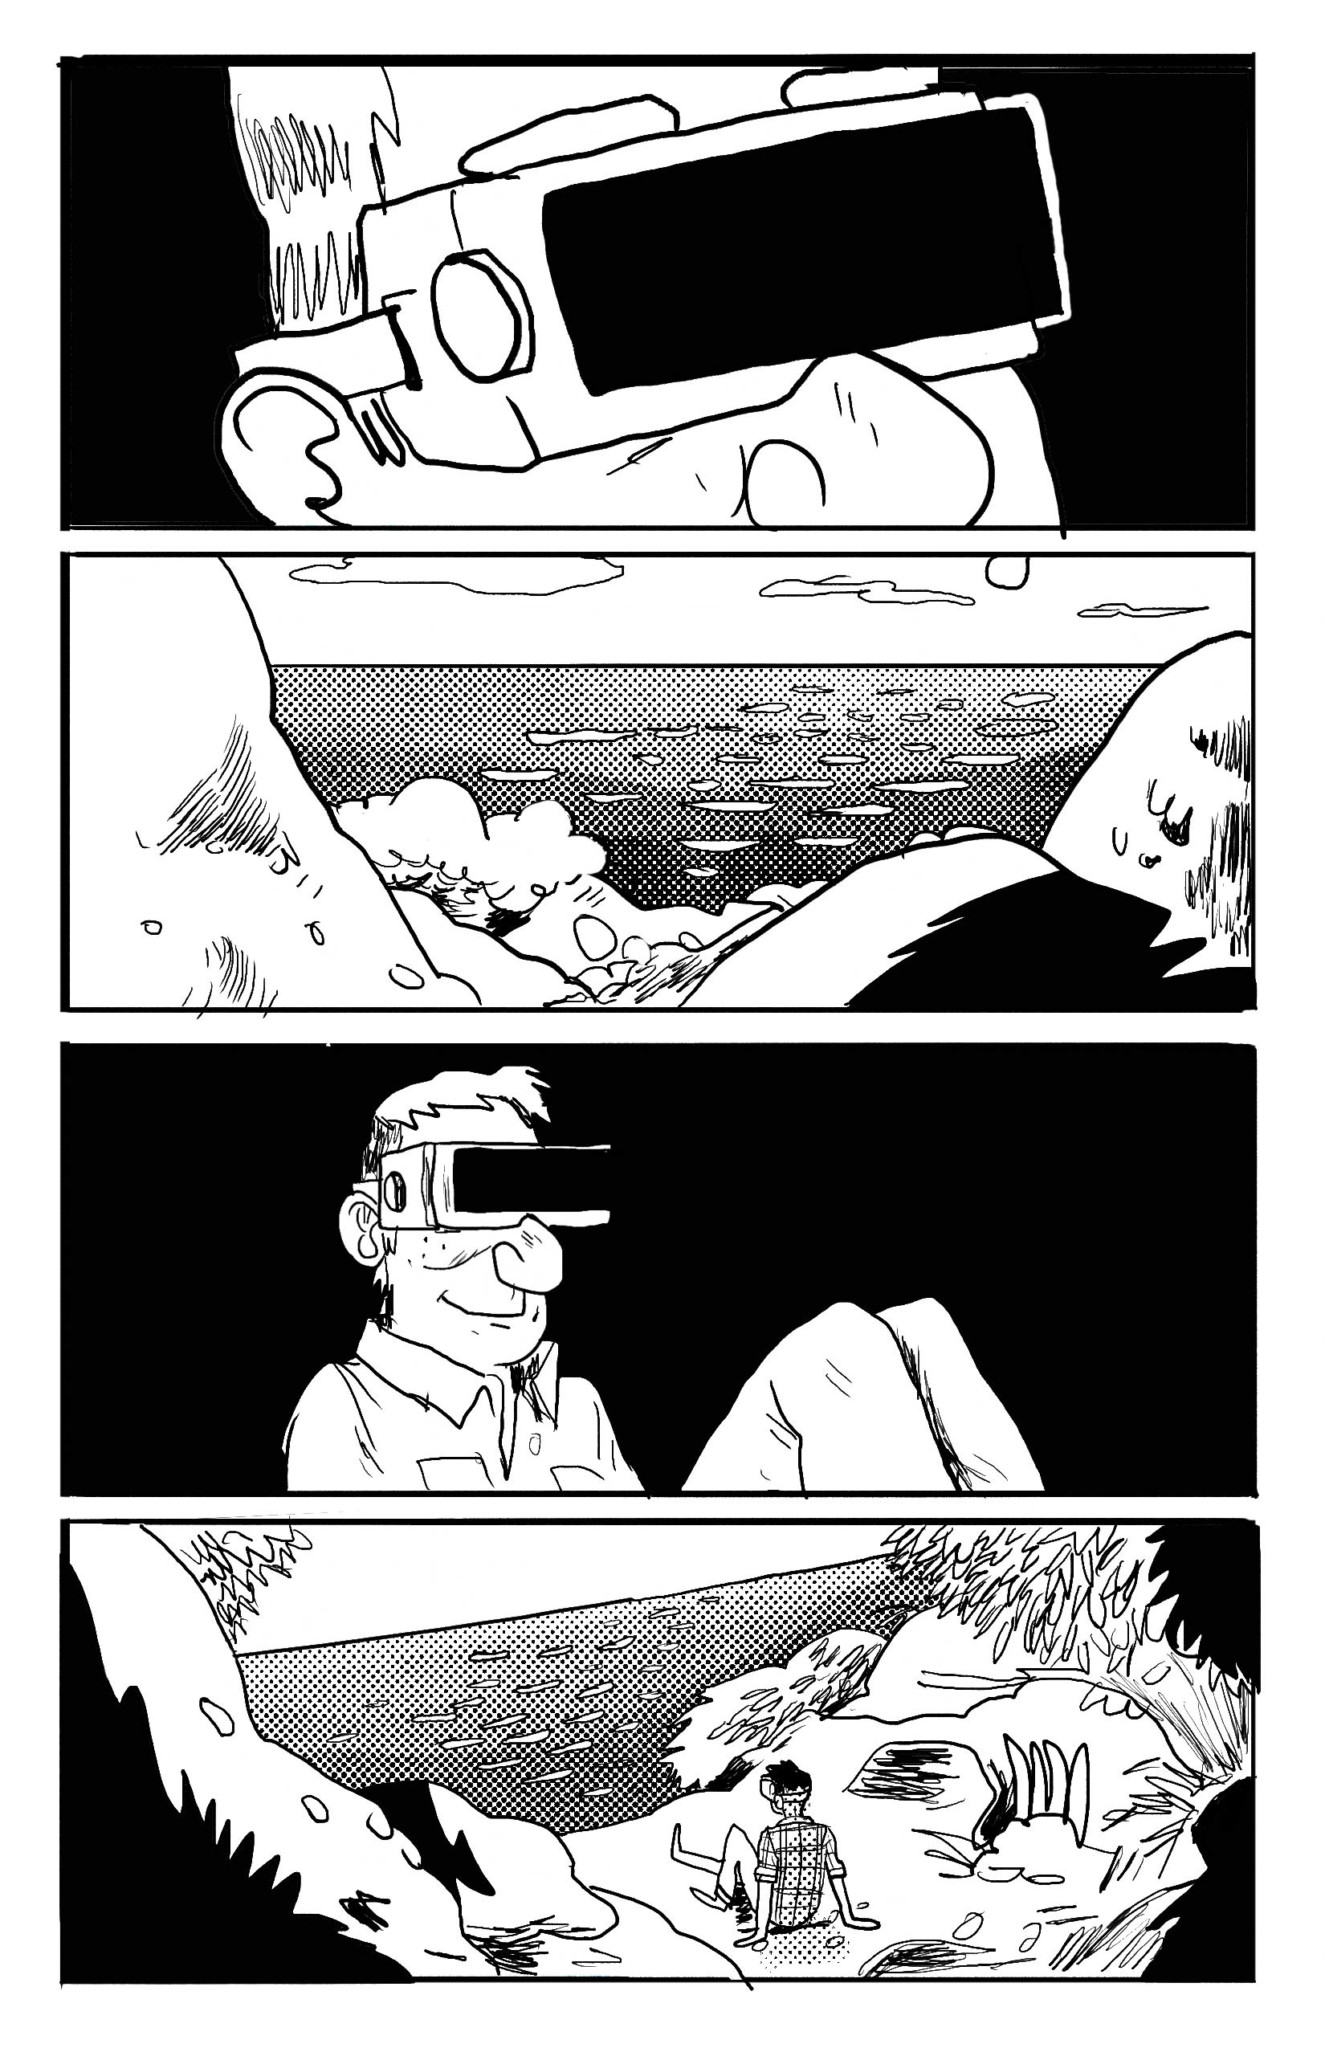 BeingHere_Page8